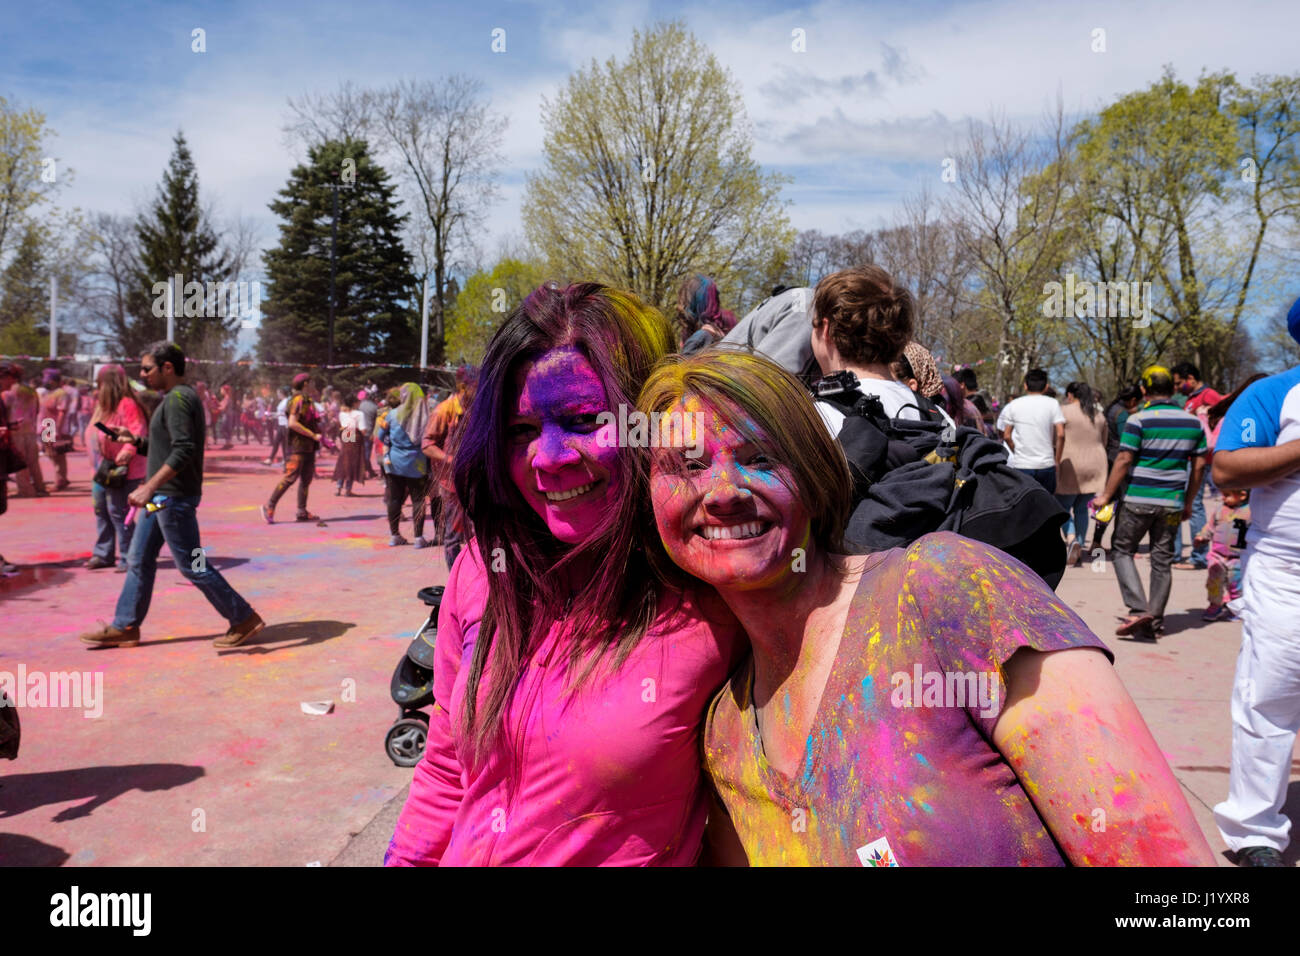 London, Ontario, Canada, 22nd Apr, 2017. Two teen girls with face paing smiling at the camera at Victoria Park during the Holi Spring Festival, also known as Rangwali Holi, Dhuleti, Dhulandi, Phagwah, or simply as Festival of Colours, an Hindu festival to celebrate the arrival of Spring in London, Ontario, Canada. Credit: Rubens Alarcon/Alamy Live News. Stock Photo